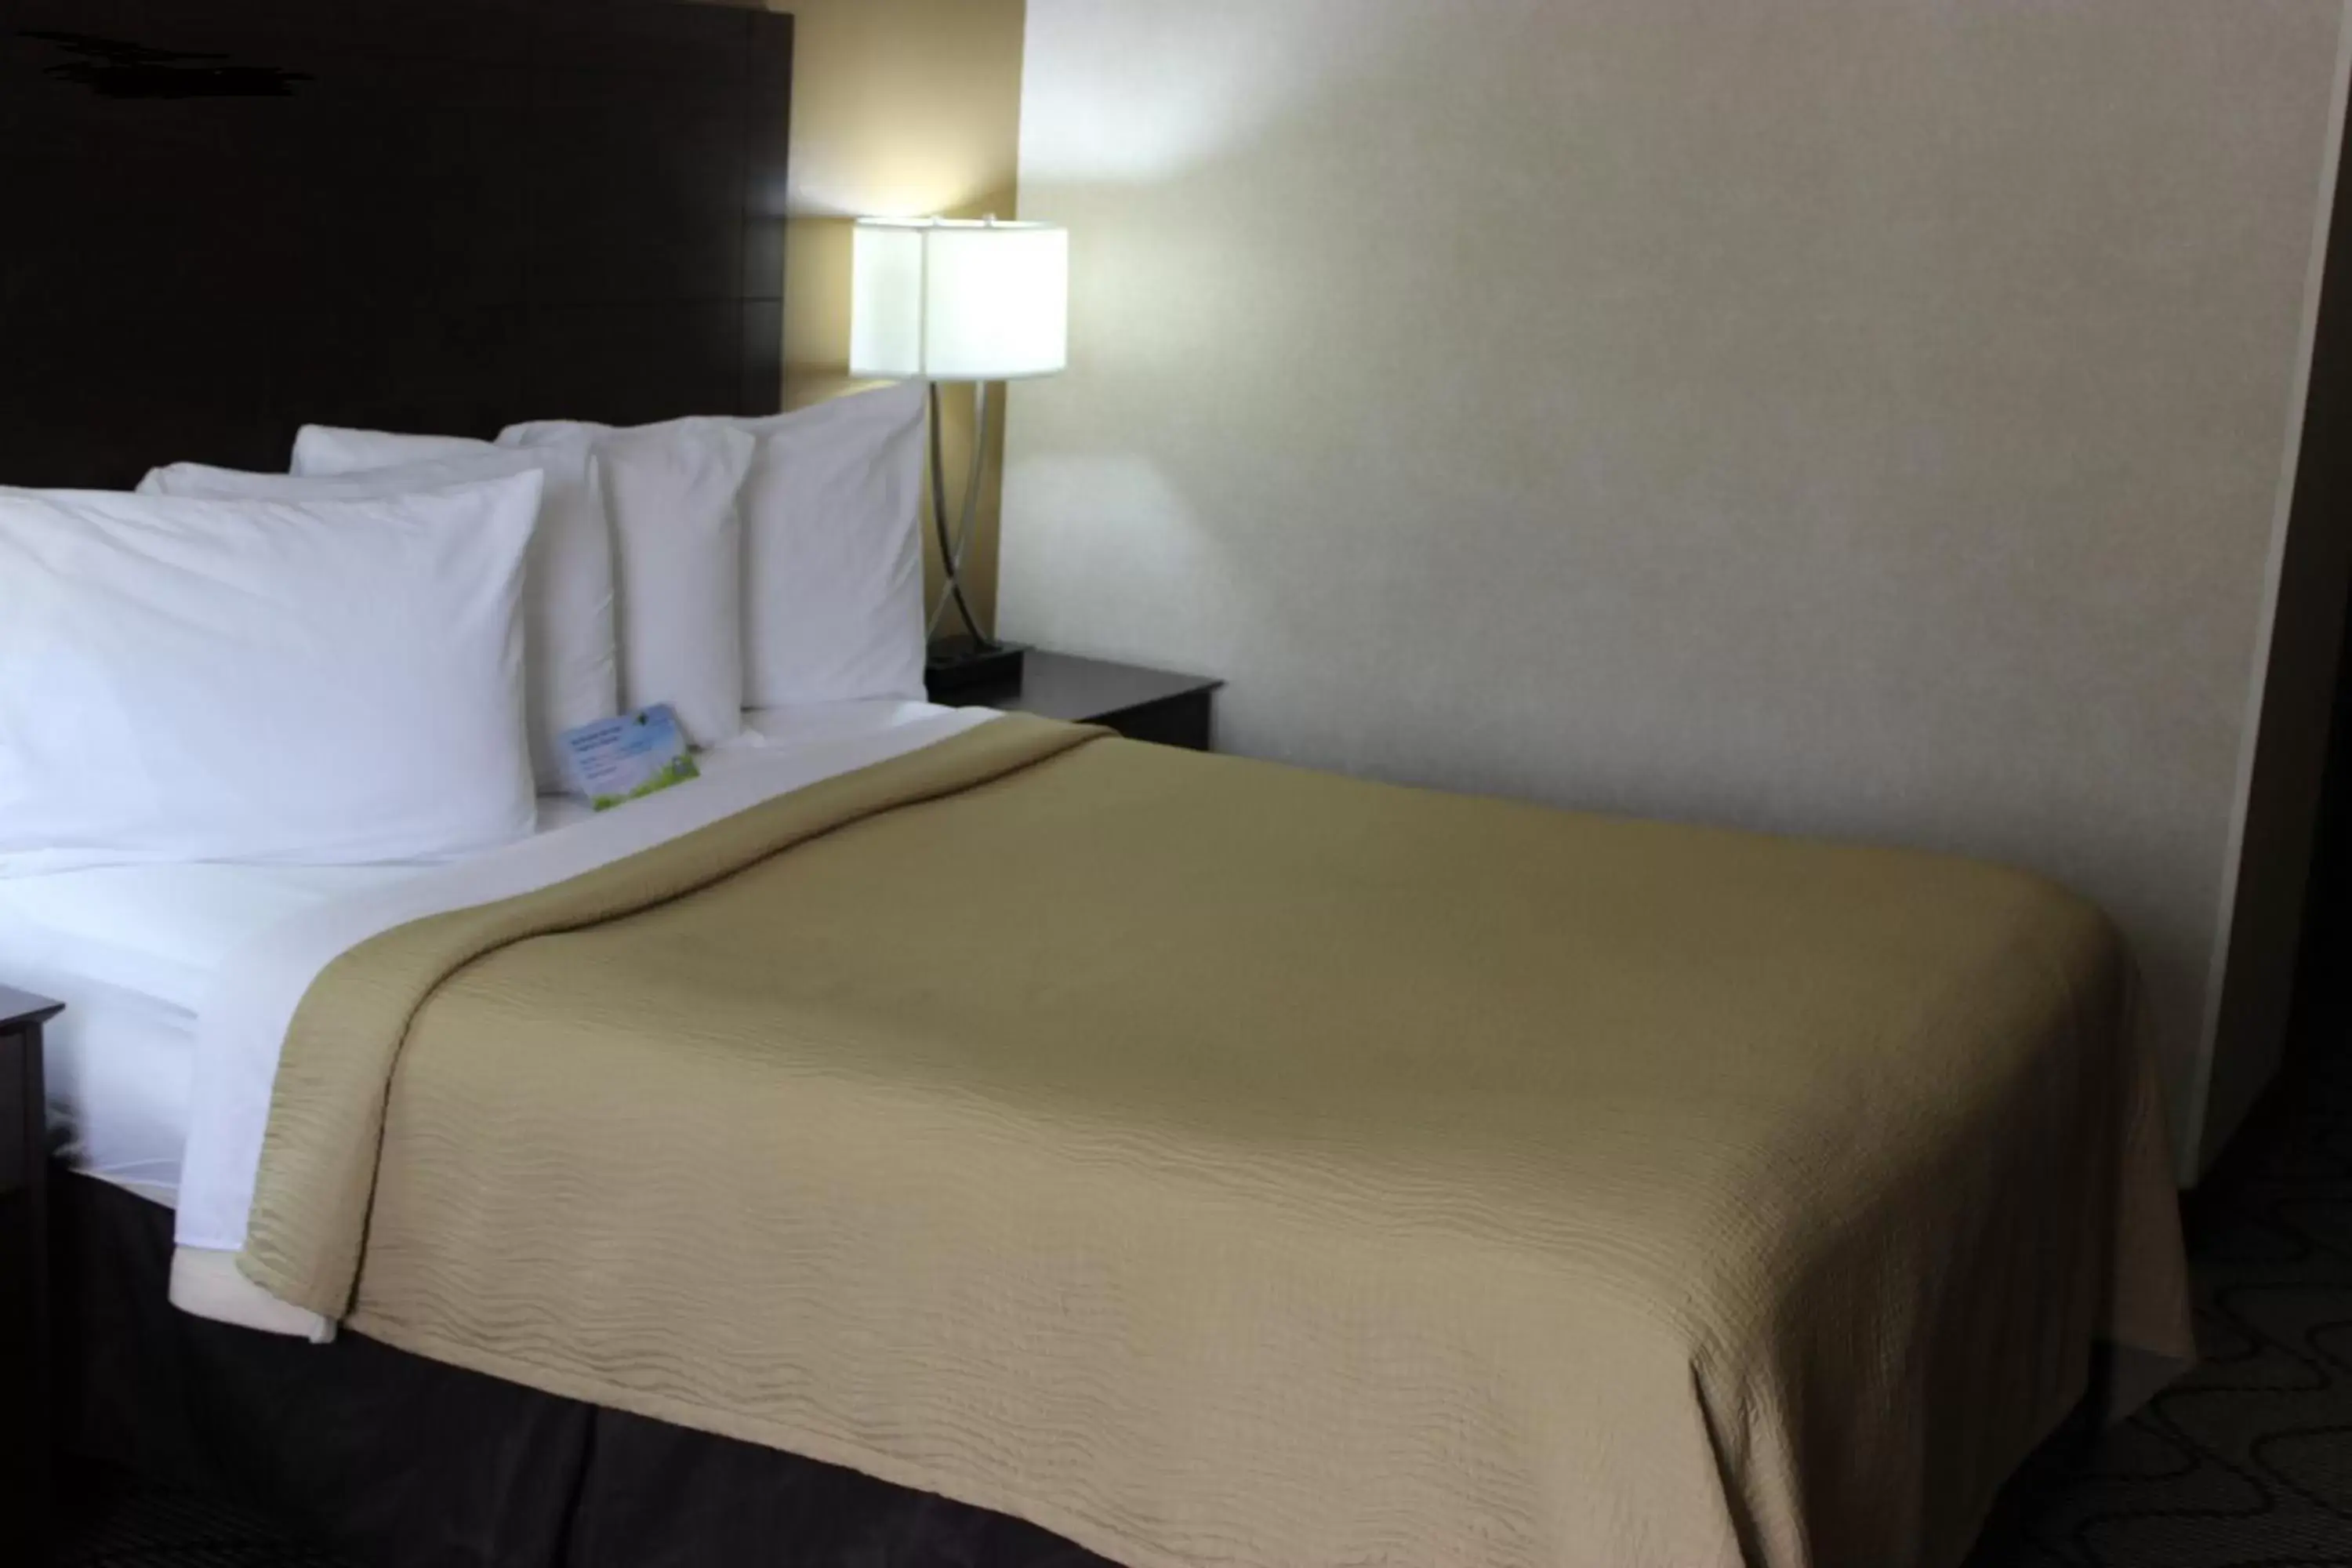 Bed, Room Photo in Days Inn by Wyndham Columbia Mall